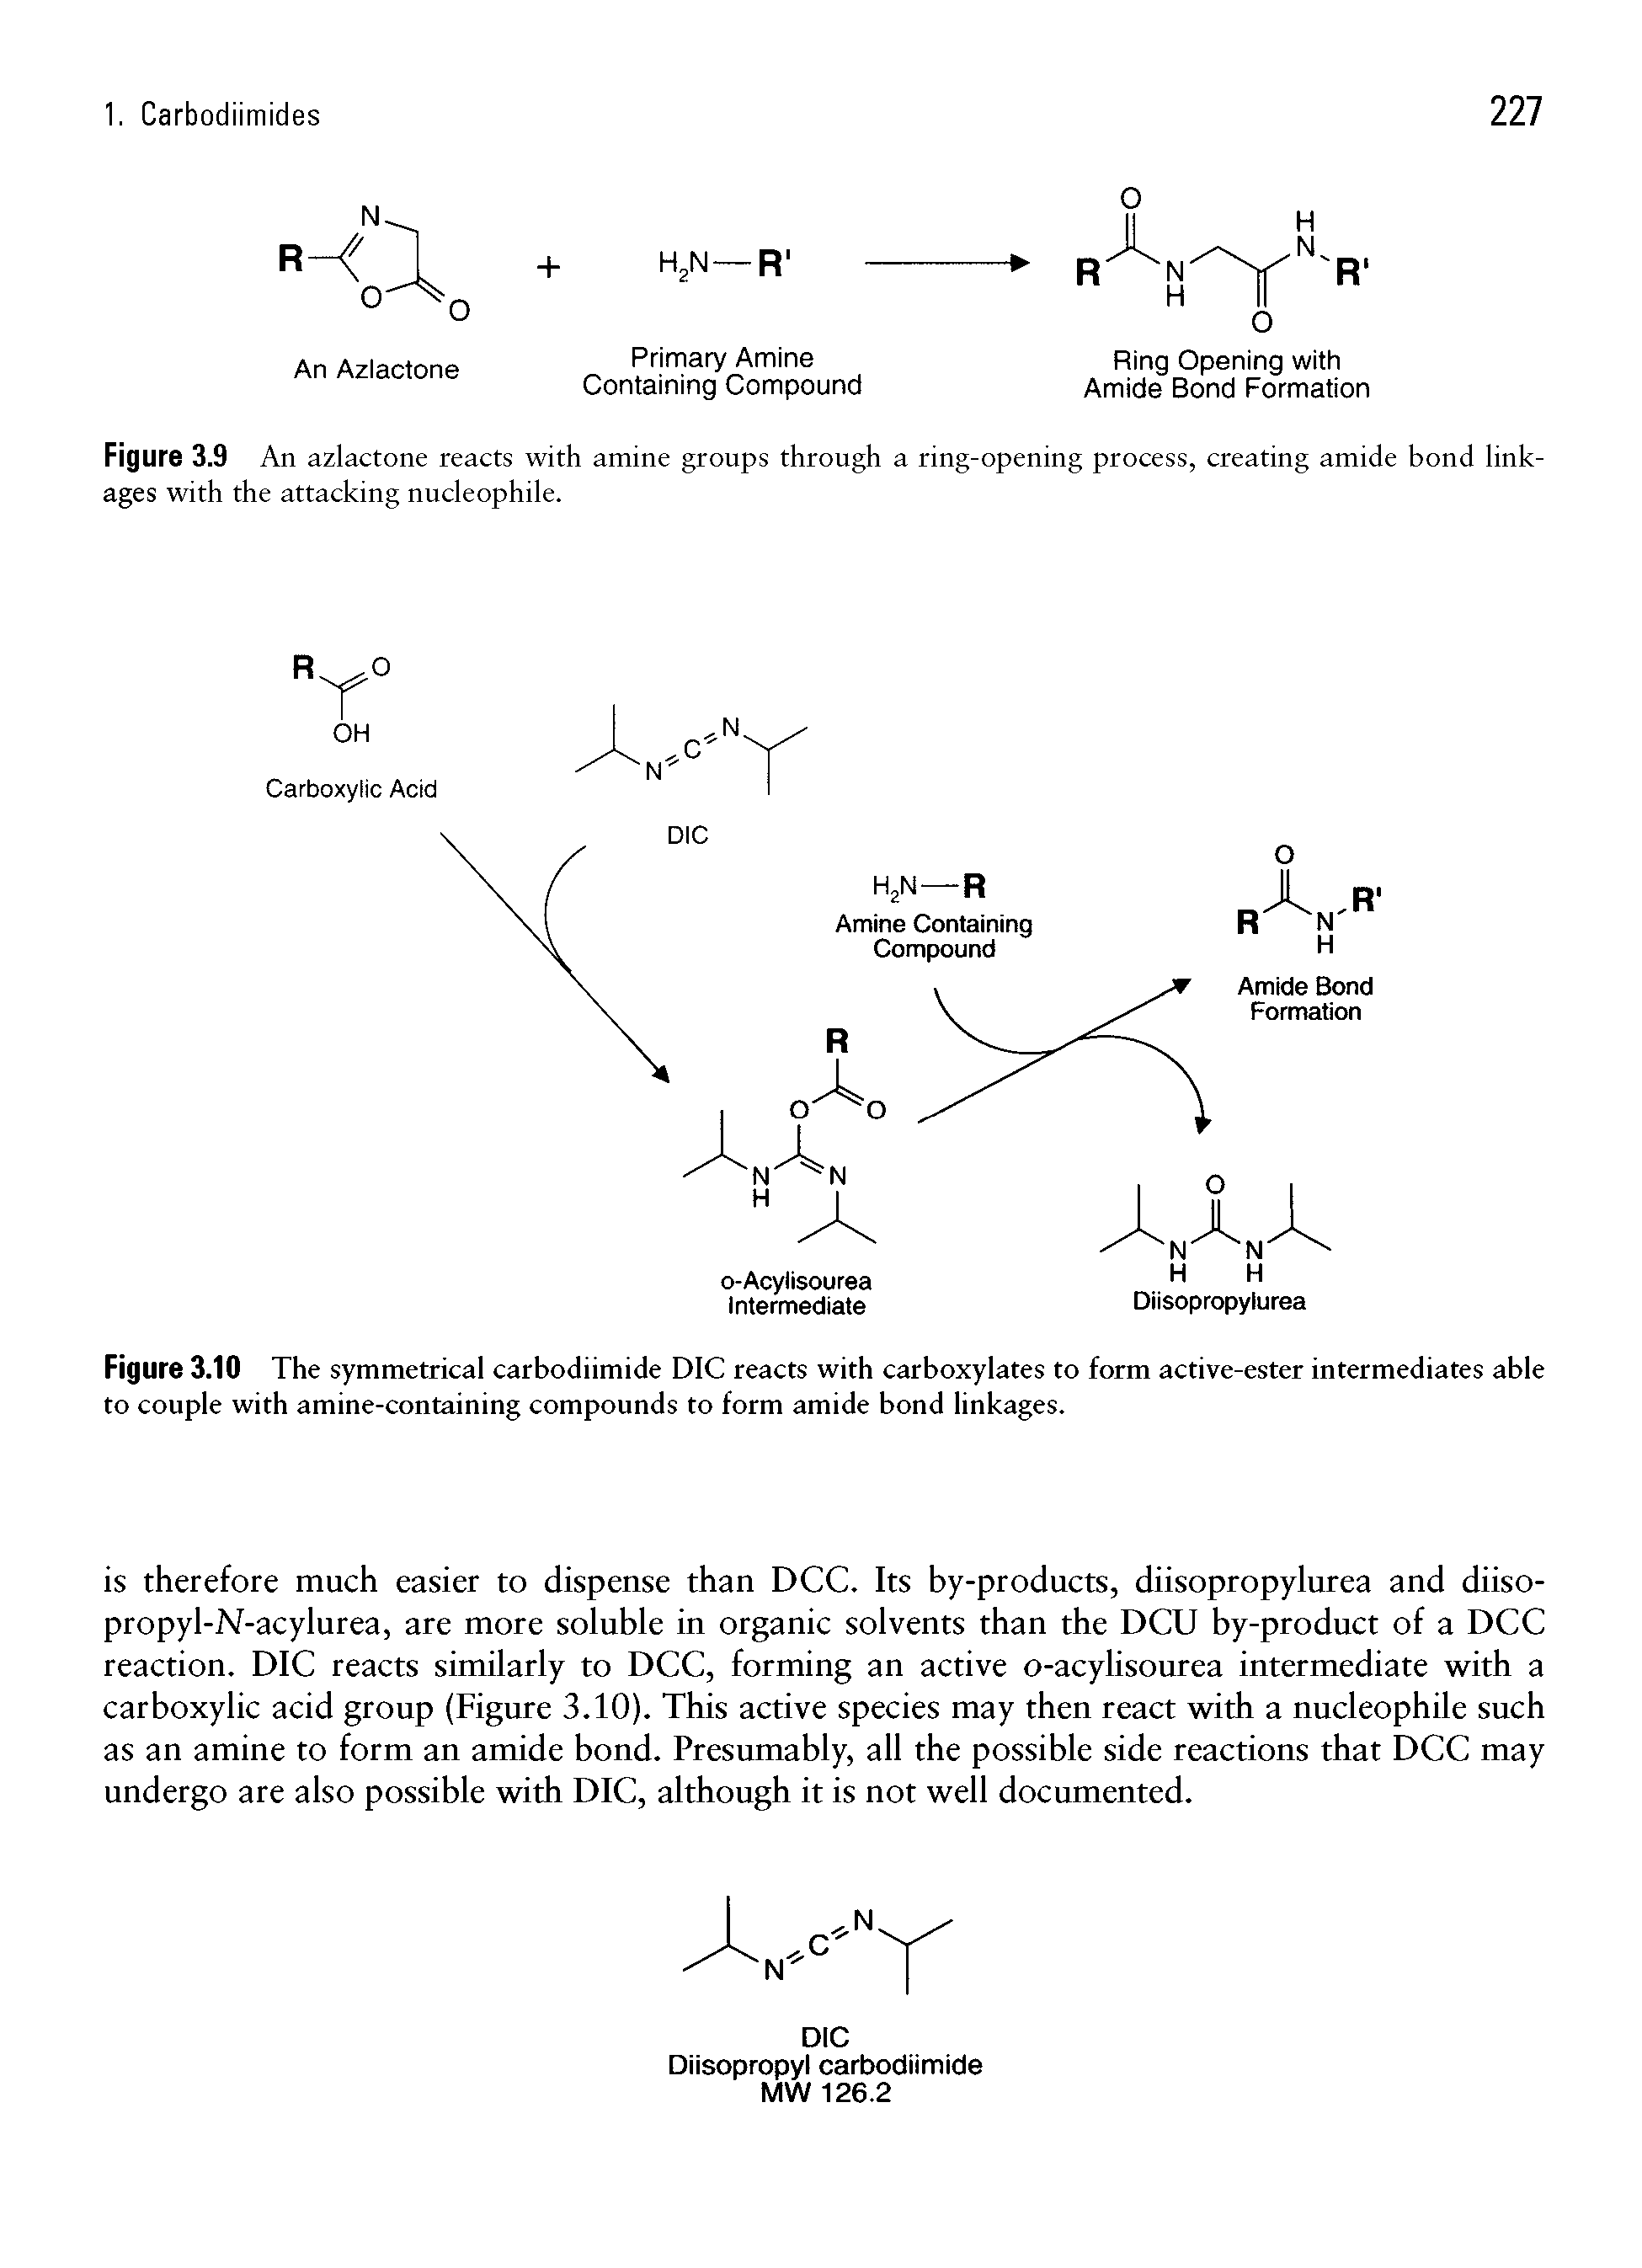 Figure 3.10 The symmetrical carbodiimide DIC reacts with carboxylates to form active-ester intermediates able to couple with amine-containing compounds to form amide bond linkages.